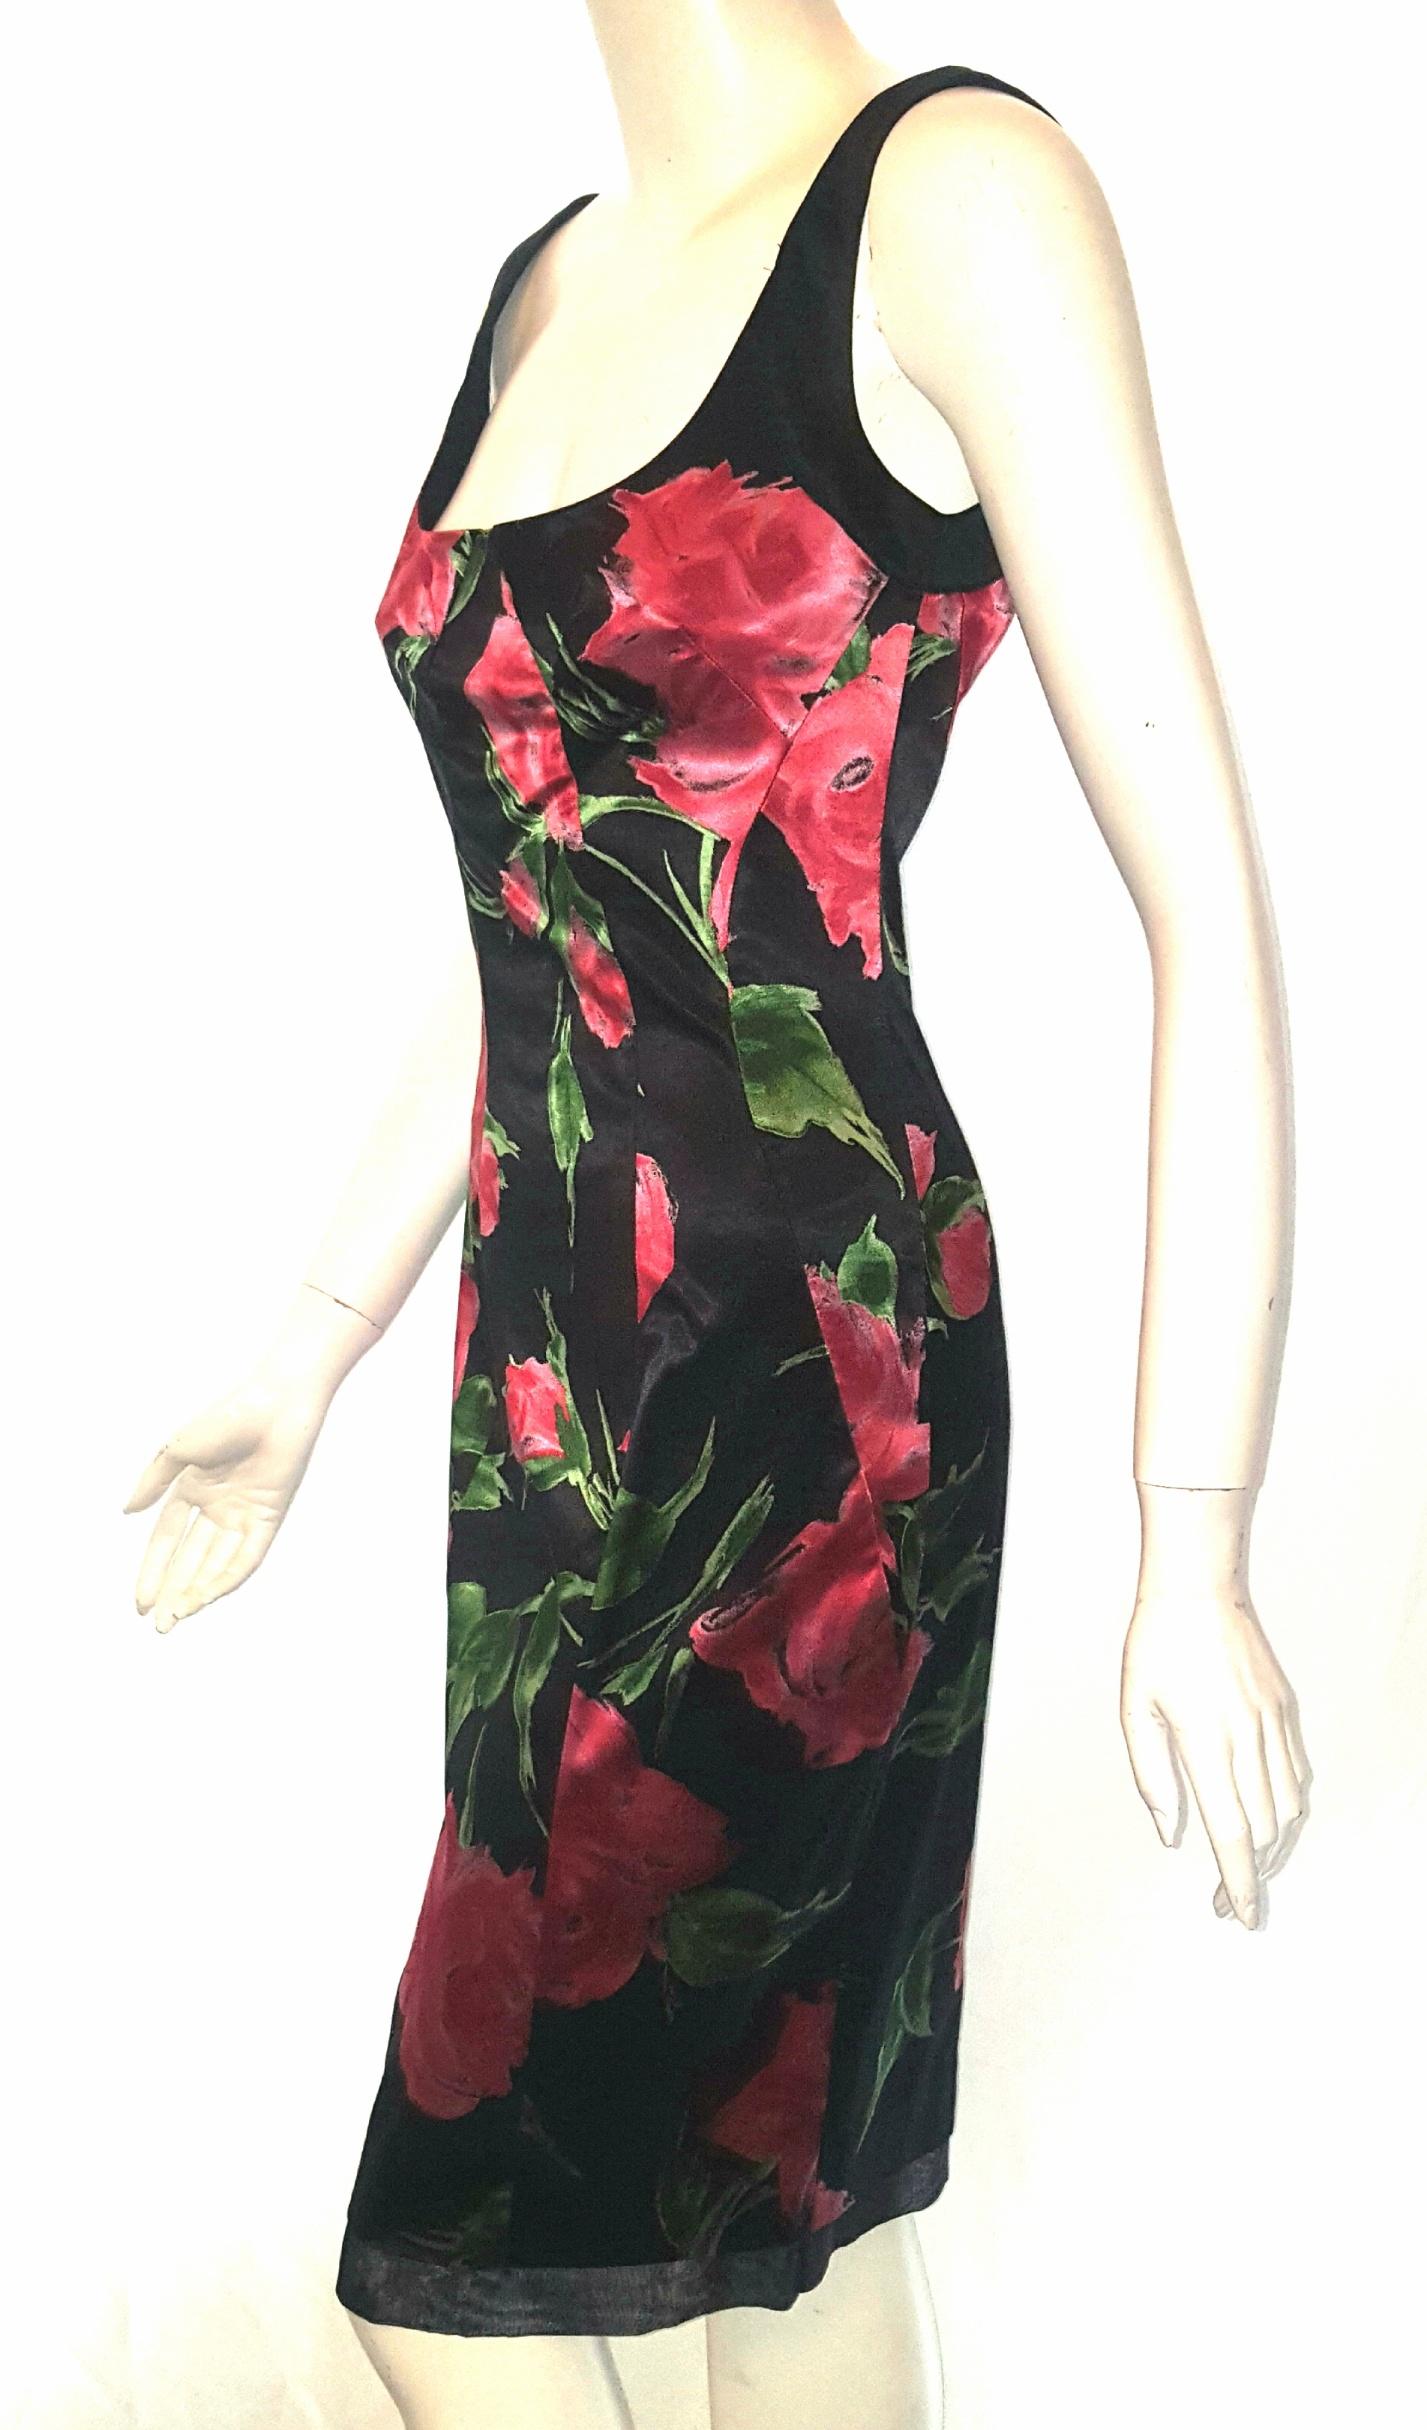 Only Under 40 by D&G (Dolce & Gabbana) black and red stretchy satin sleeveless dress contains a zipper at back for closure and a single vent, also, at back.   The front  & back include curved darts from bustline to the hem and from the waistline to